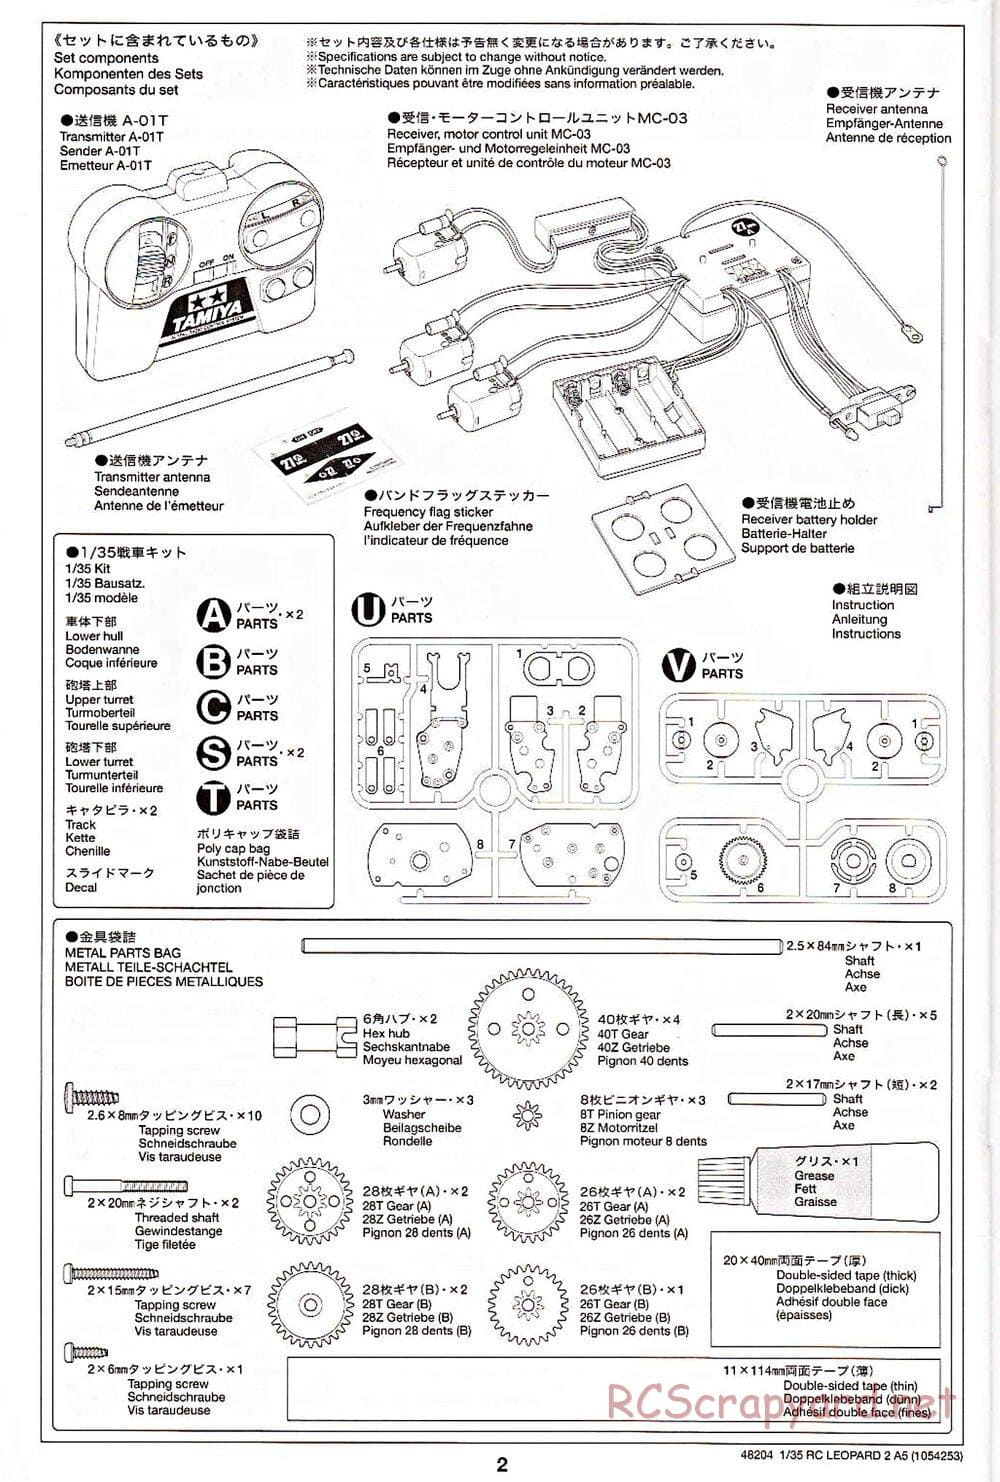 Tamiya - Leopard 2 A5 Main Battle Tank - 1/35 Scale Chassis - Manual - Page 2